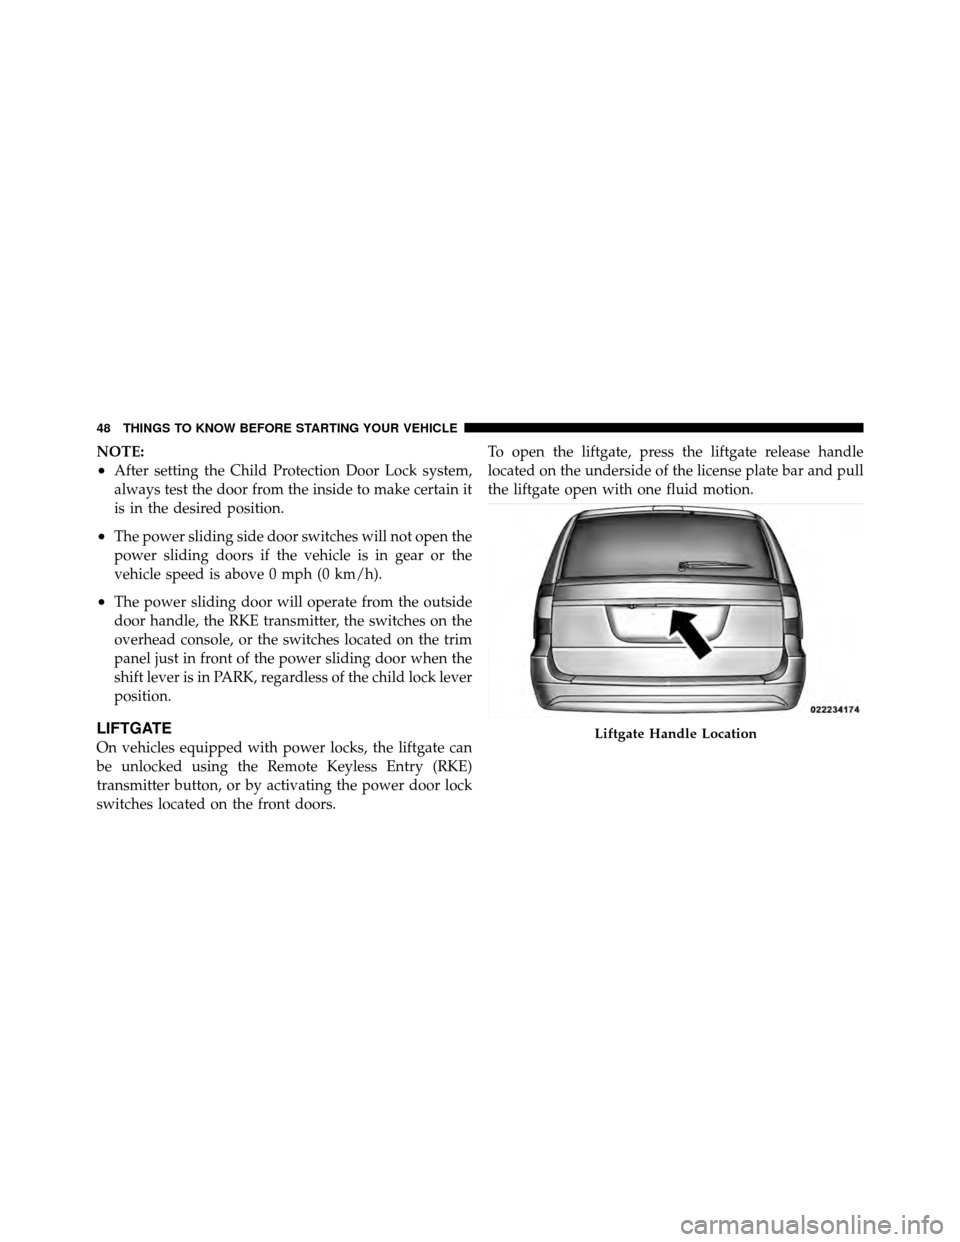 DODGE GRAND CARAVAN 2012 5.G Workshop Manual NOTE:
•After setting the Child Protection Door Lock system,
always test the door from the inside to make certain it
is in the desired position.
•The power sliding side door switches will not open 